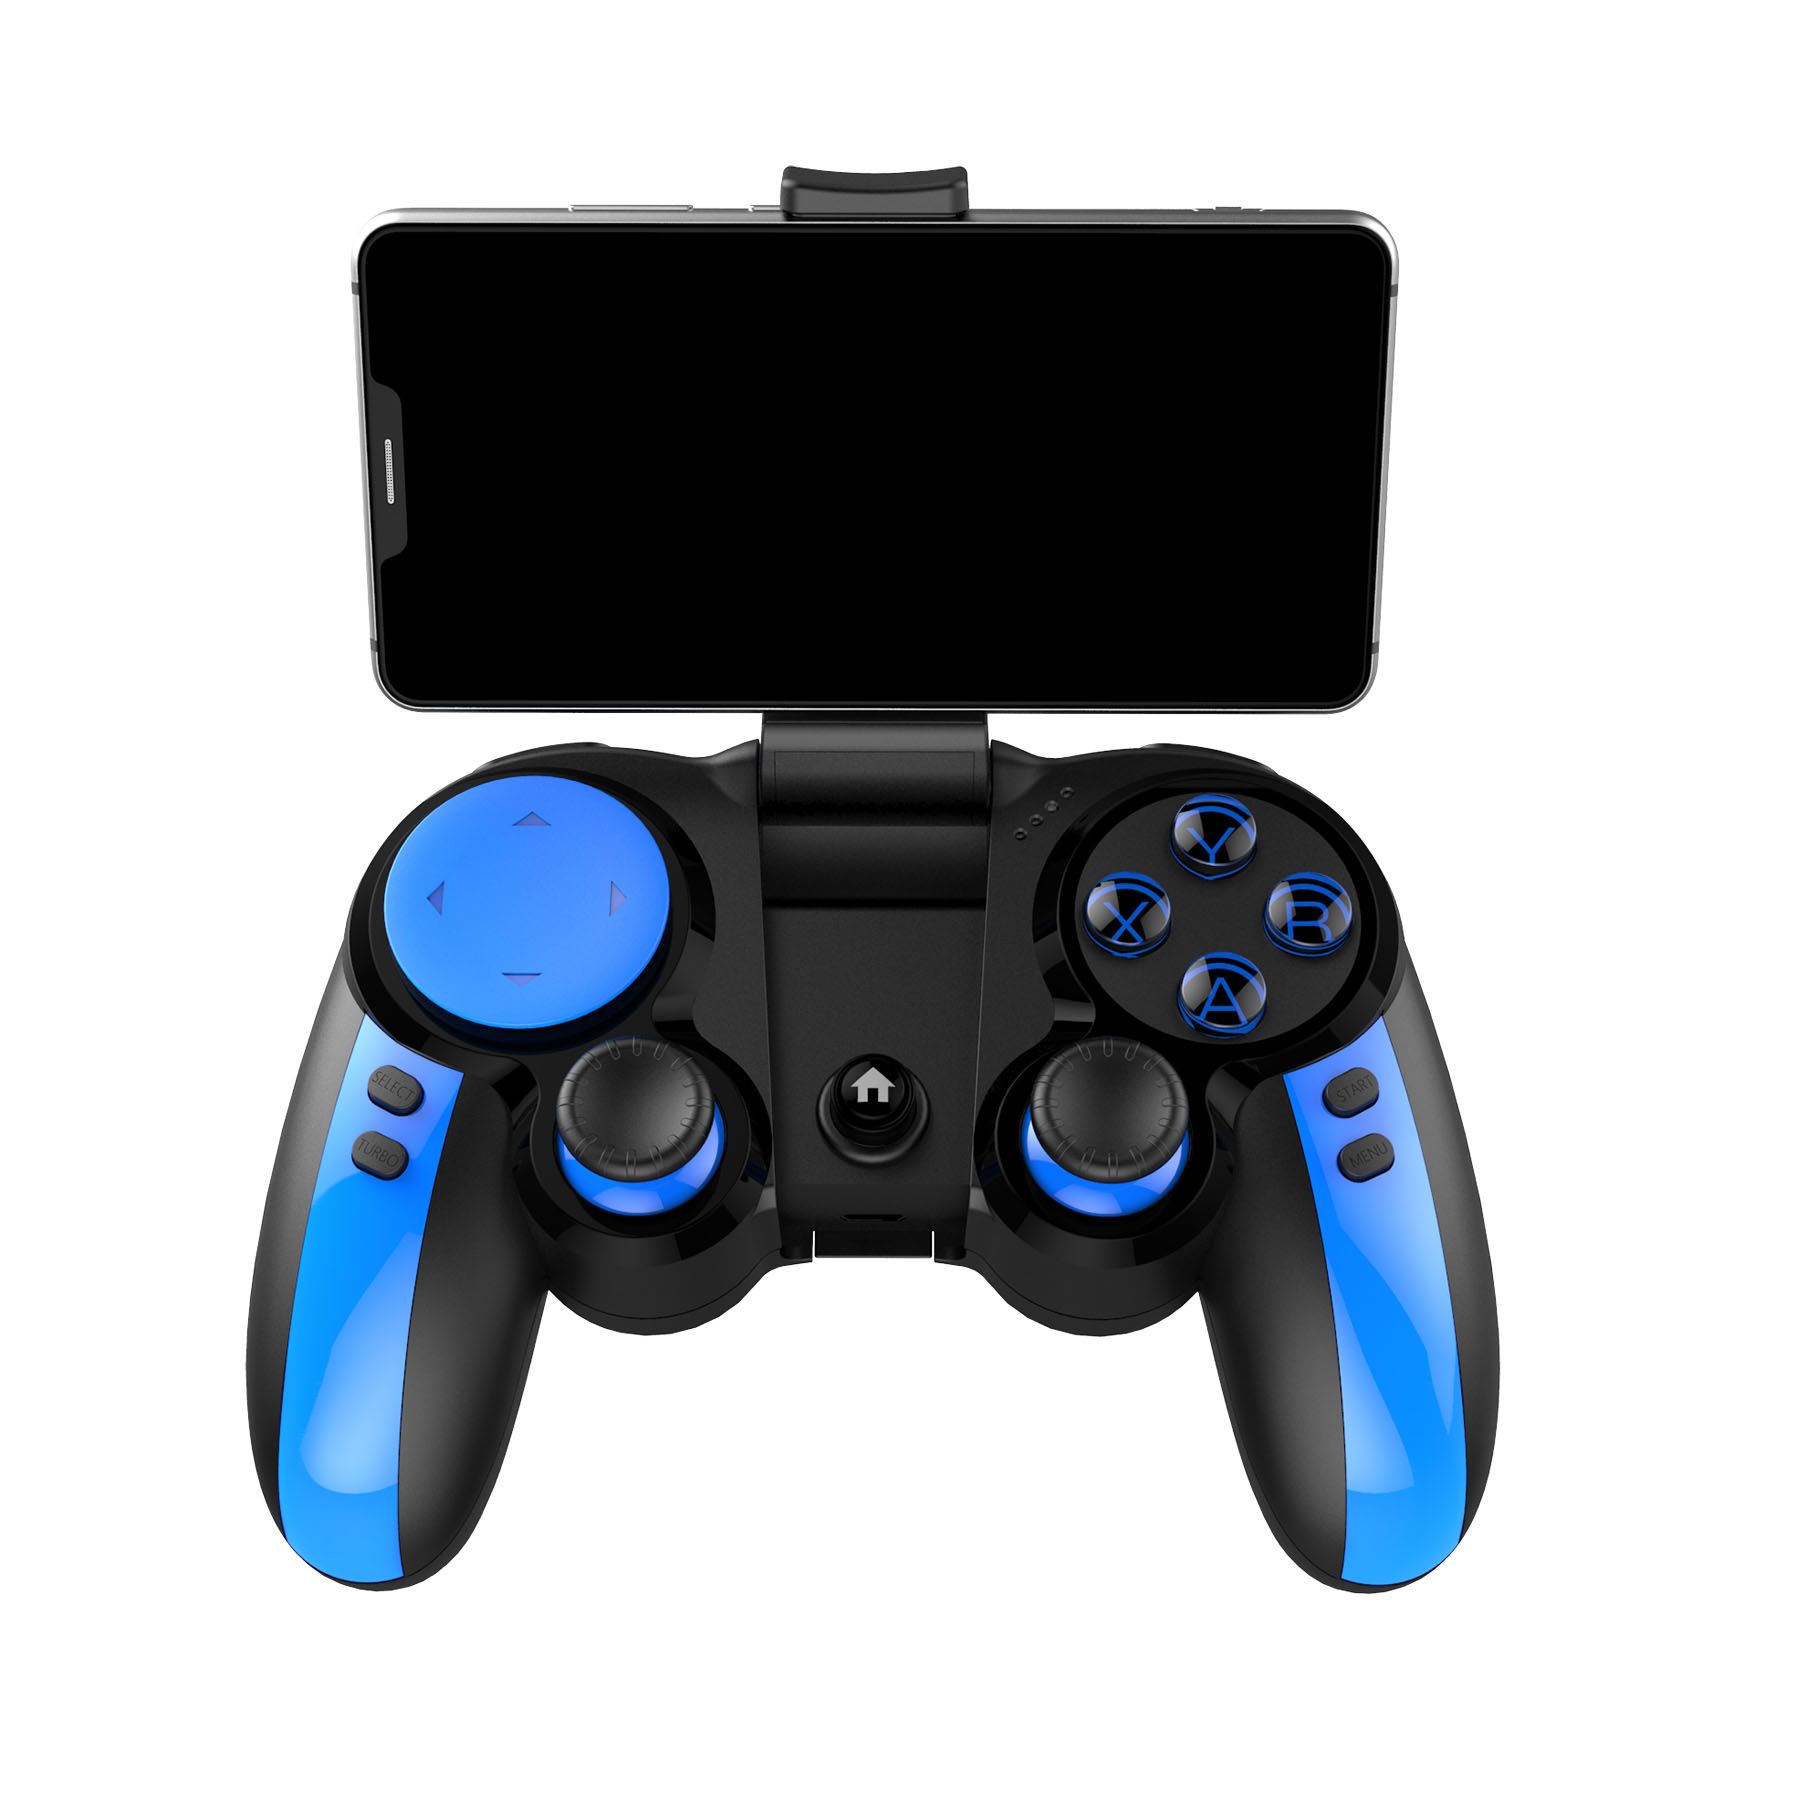 iPega-PG-9090-Smurf-bluetooth-Gamepad-Game-Controller-for-for-PUBG-for-IOS-Andriod-TV-Box-PC-1448785